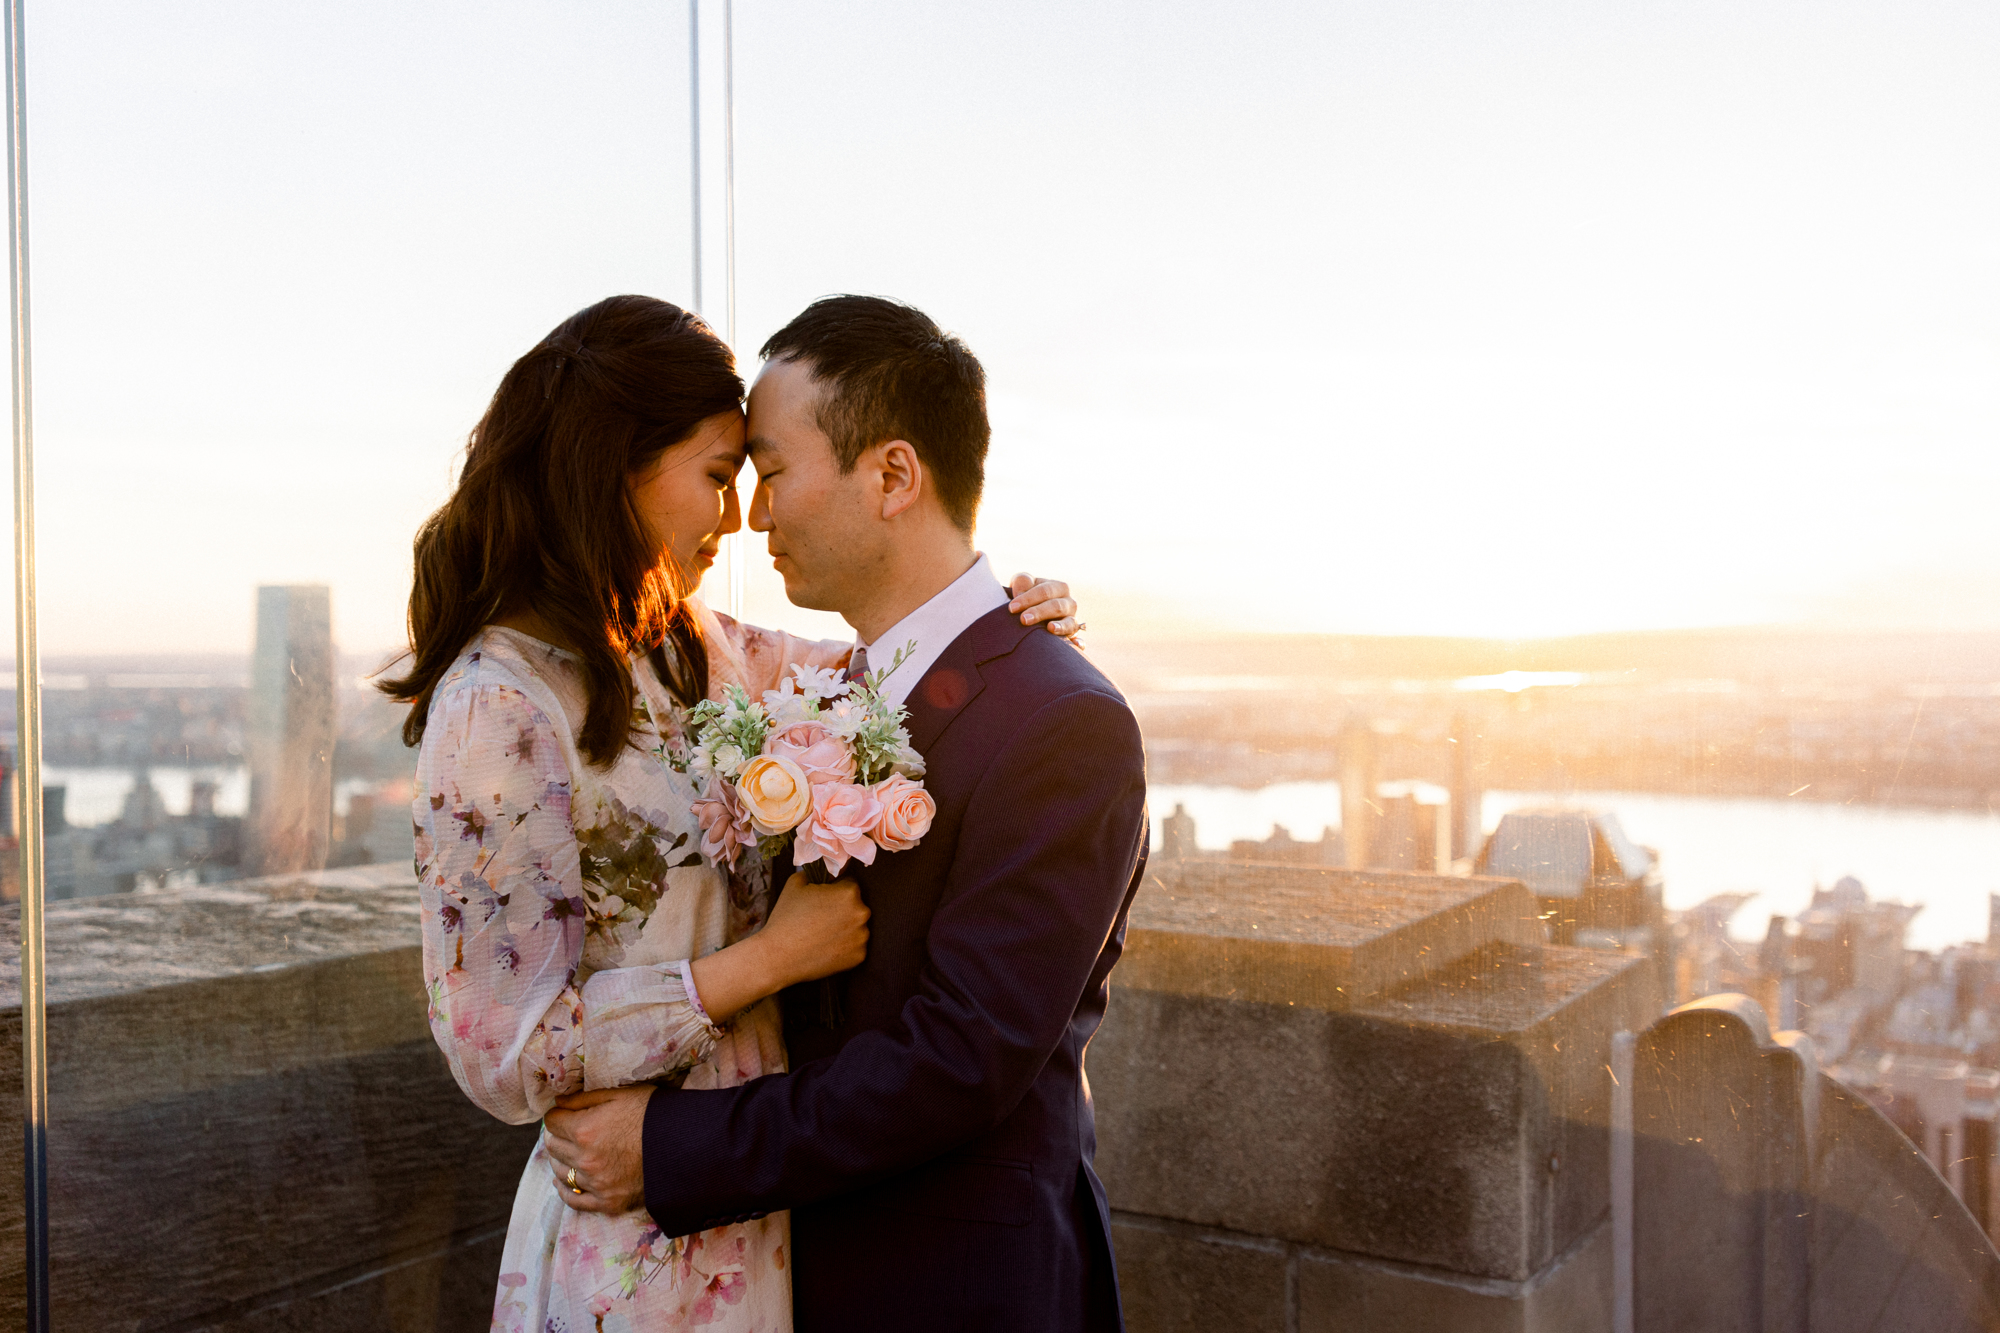 Romantic Top of the Rock Engagement Photography at Sunset in NYC